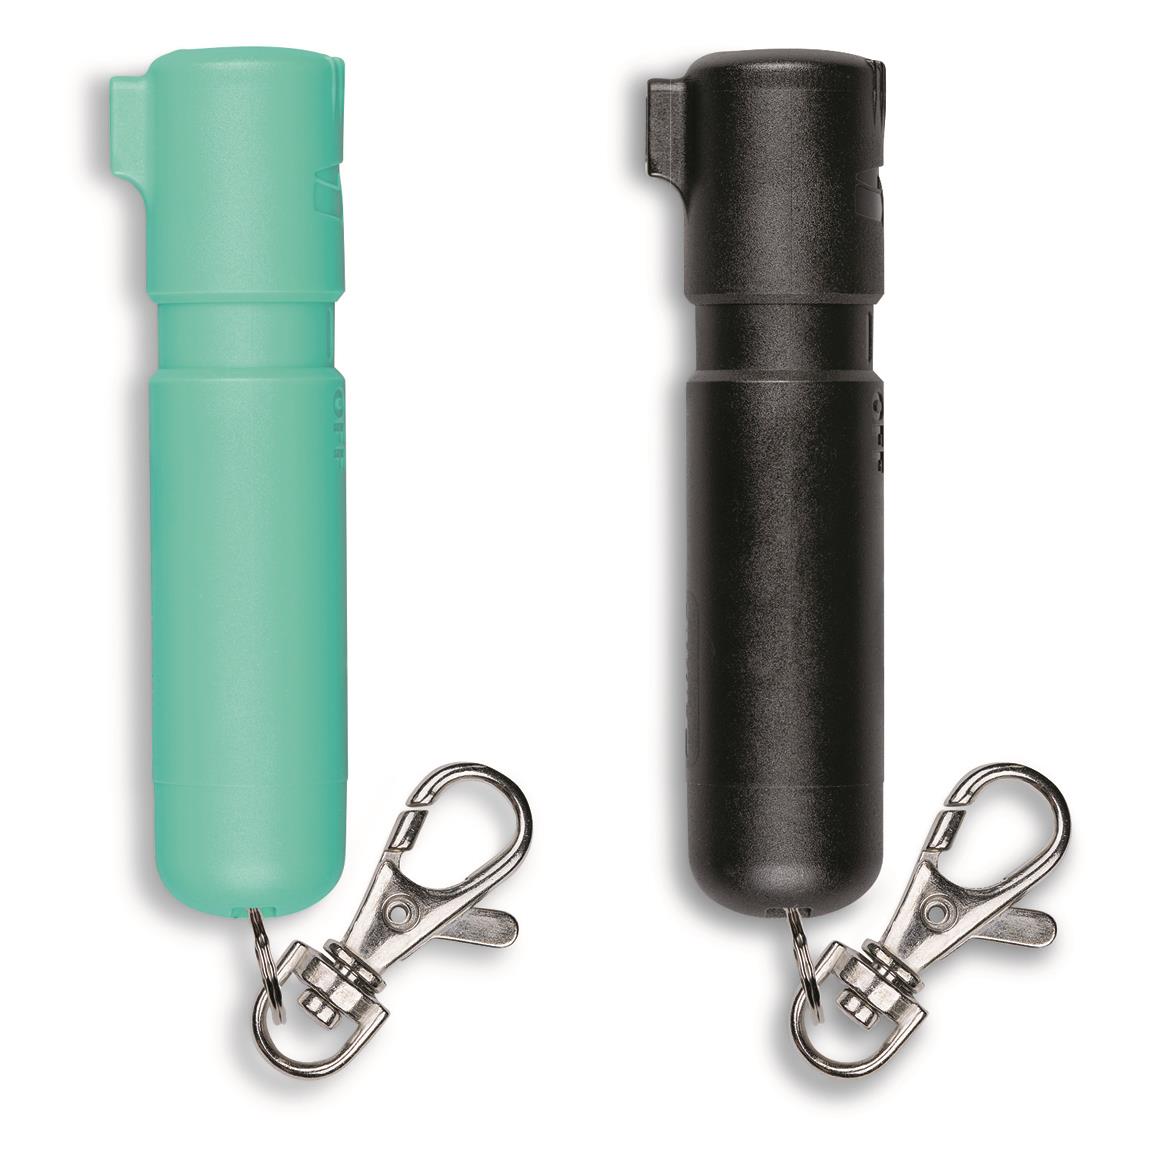 Sabre Mighty Discreet Pepper Spray, 2 Pack